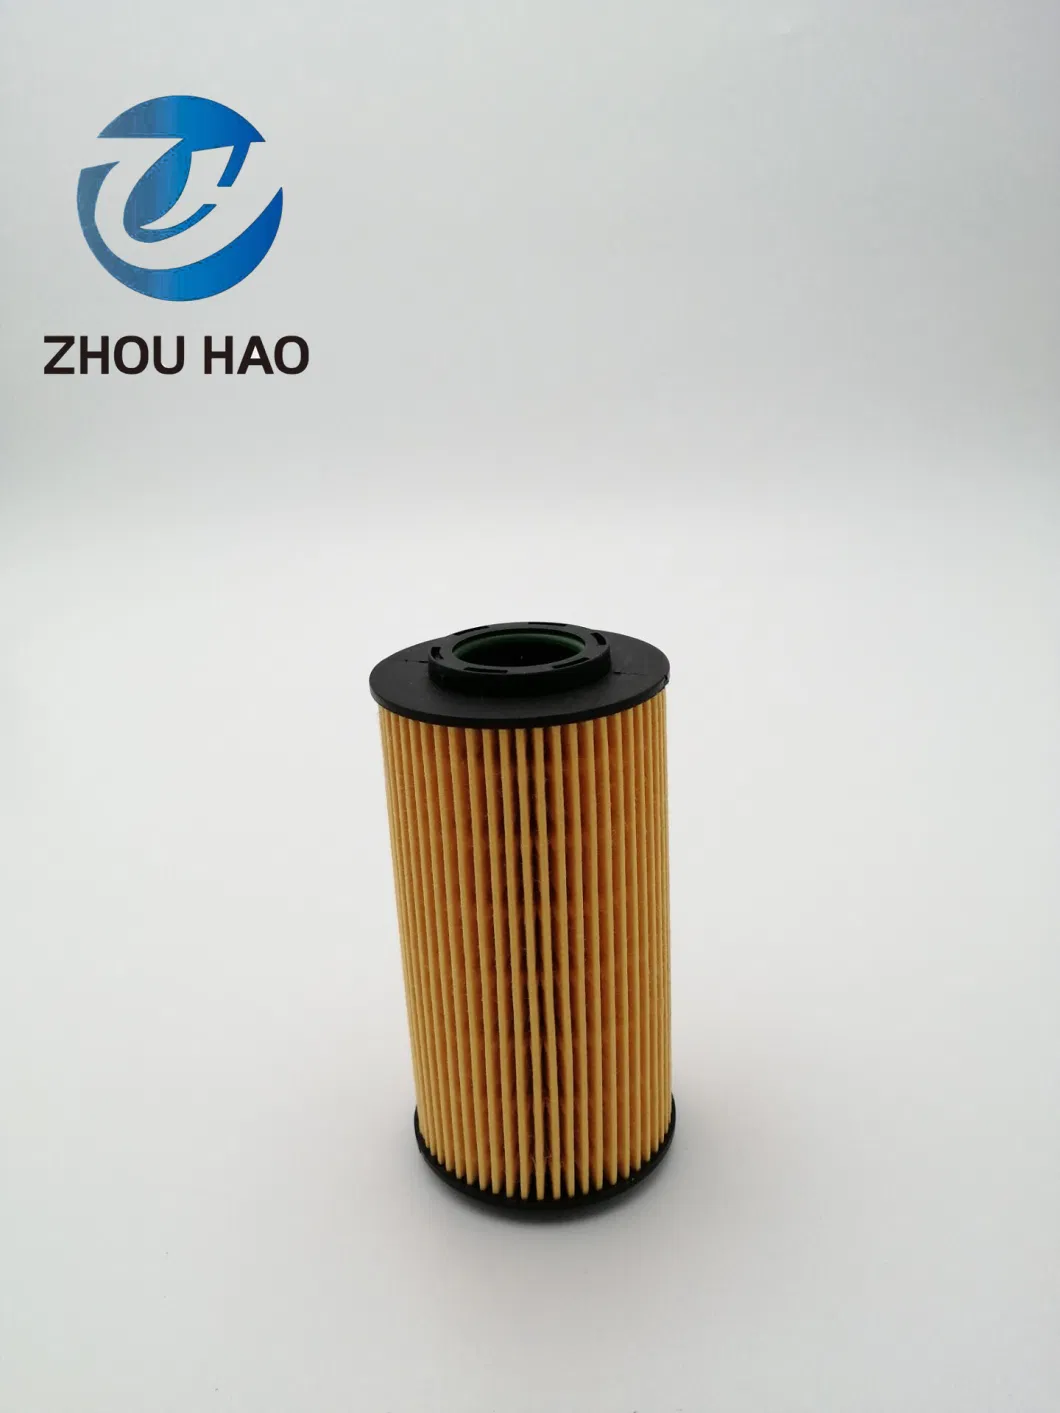 26320-2A000 26320-2A001/2A002 Hu712/10X for Hyundai KIA China Factory Oil Filter for Auto Parts